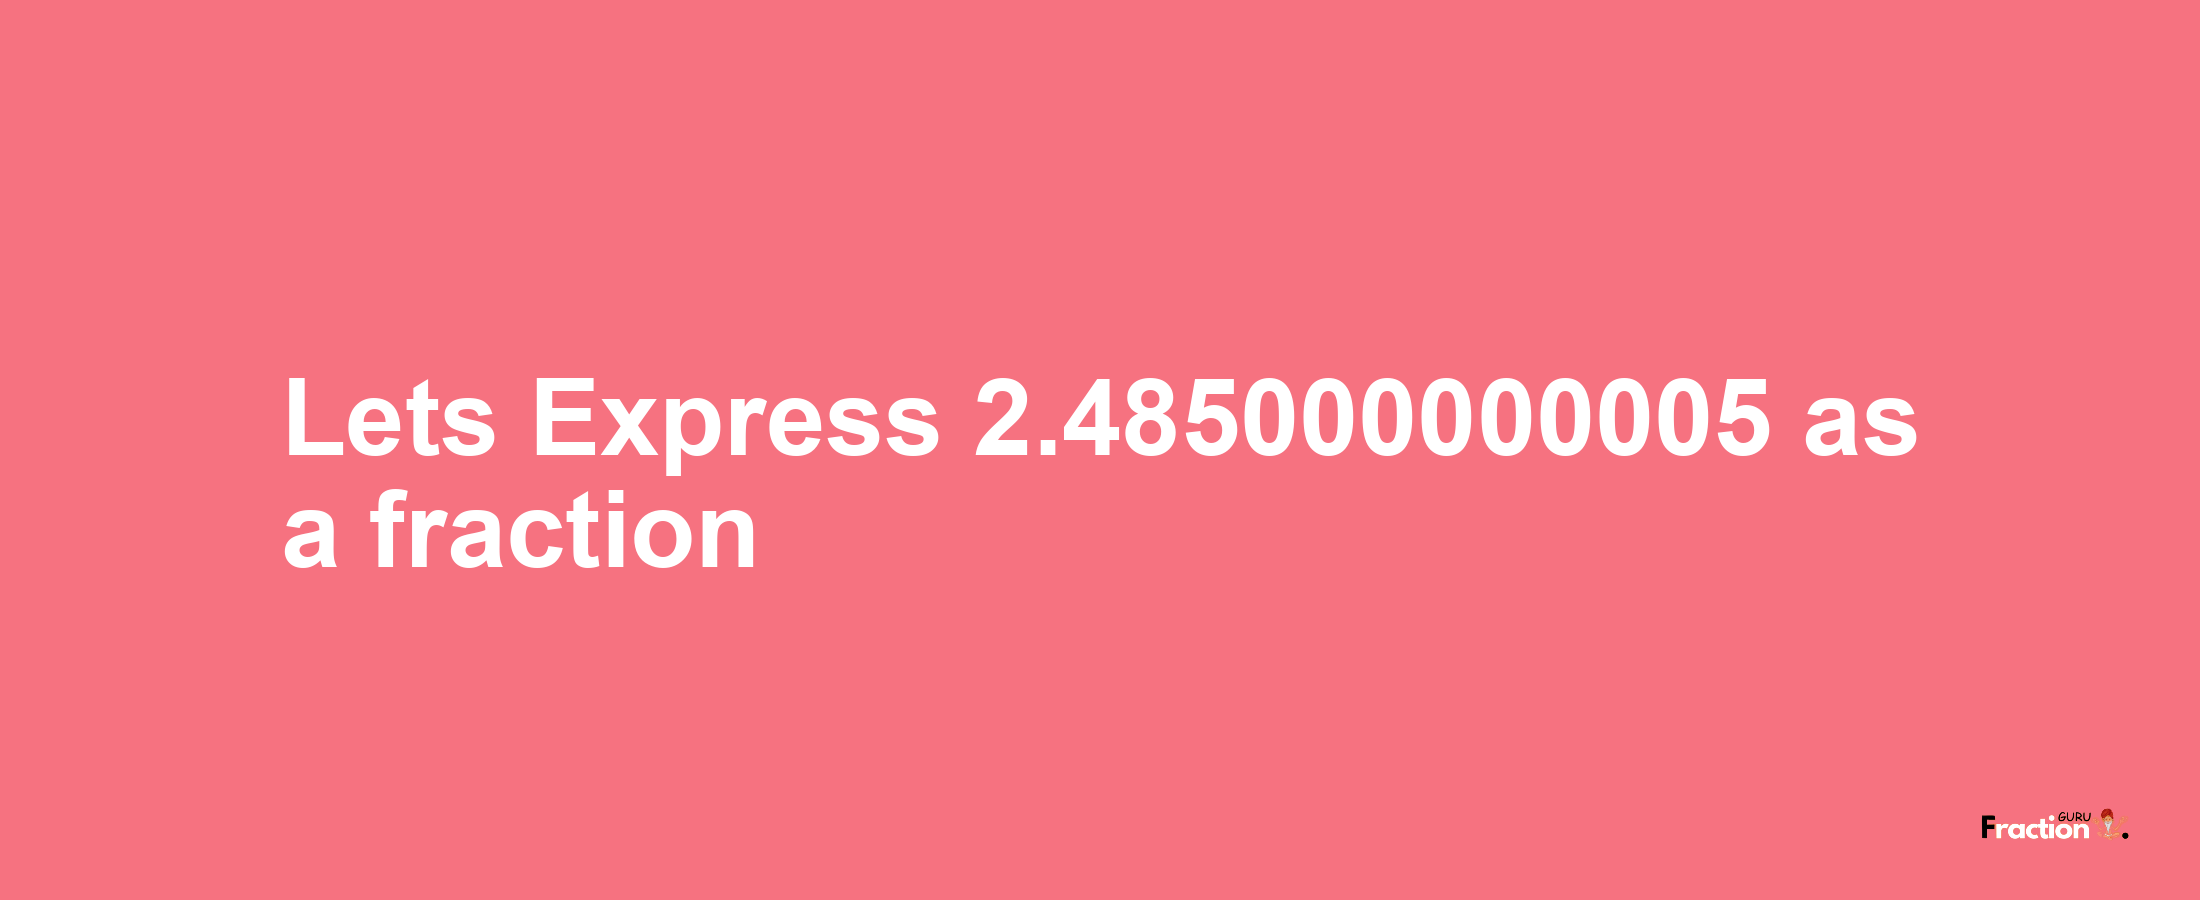 Lets Express 2.485000000005 as afraction